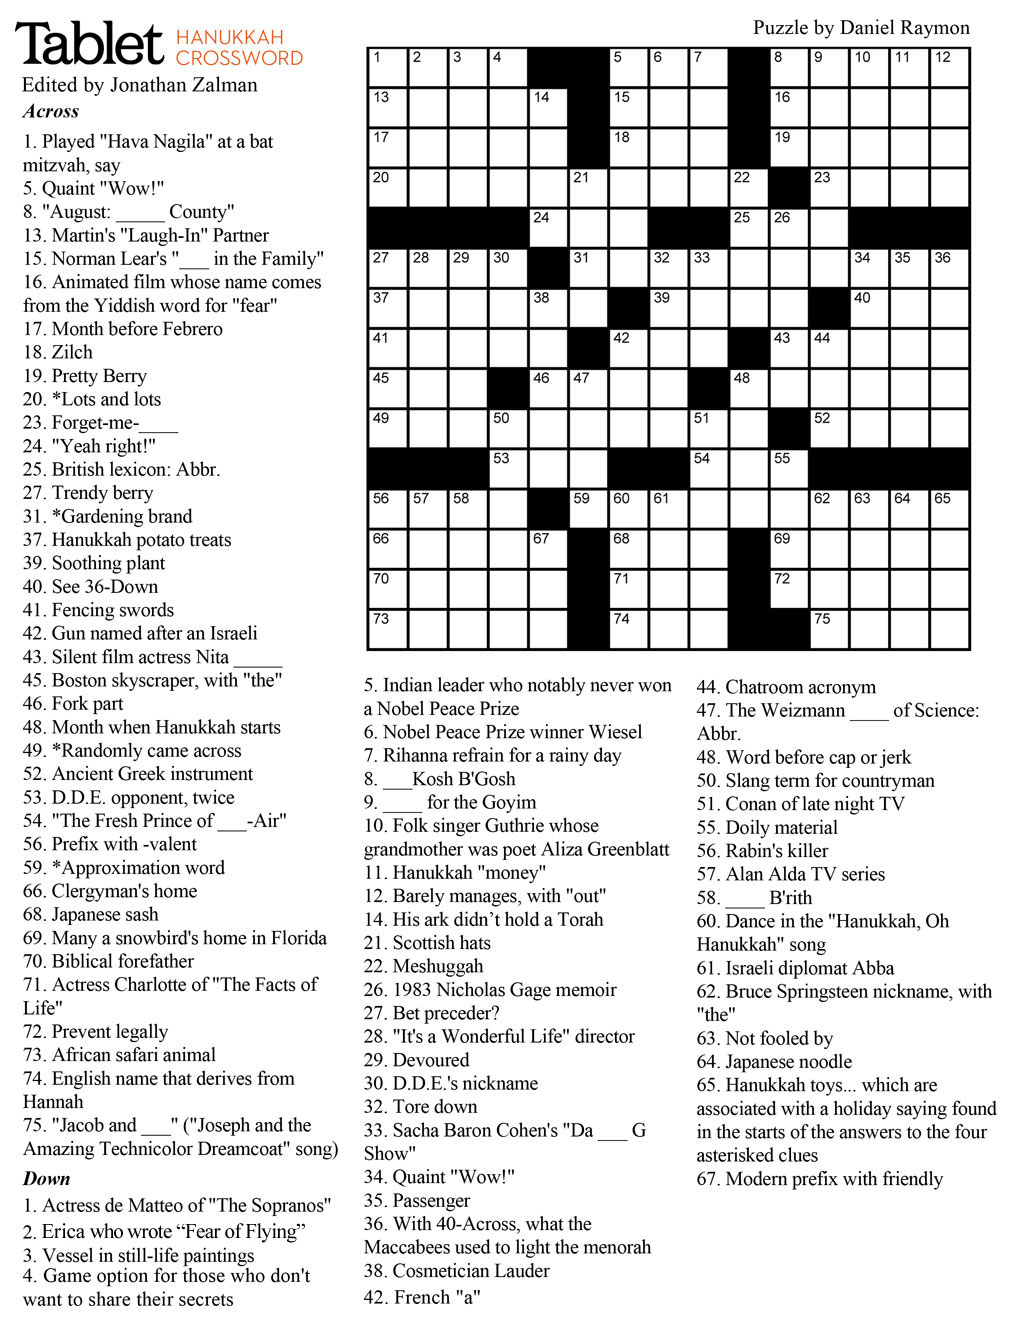 Wind Down With Our Hanukkah Crossword Puzzle! – Tablet Magazine - Picture Crossword Puzzles Printable